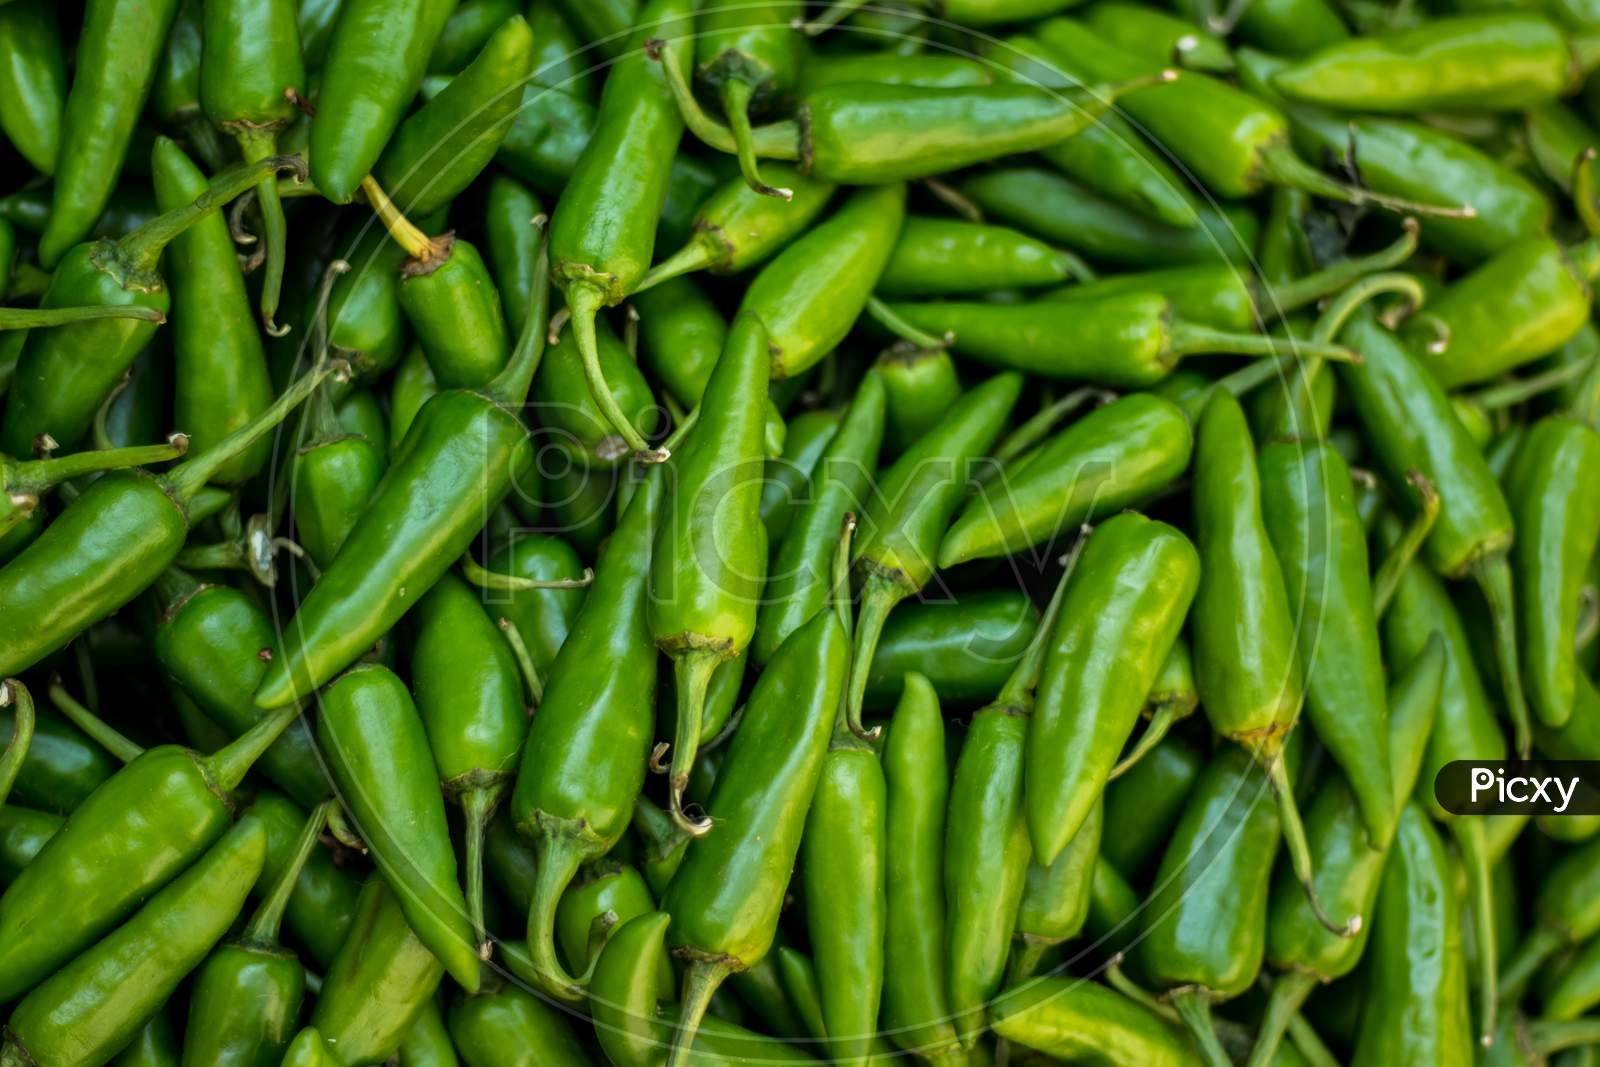 Green Chilli Peppers For Sale At Street Market. Green Chillis Freshly Plucked At The Farm. Fresh Produce Market With Close-Up View Of Pile Of Green Chilli Peppers